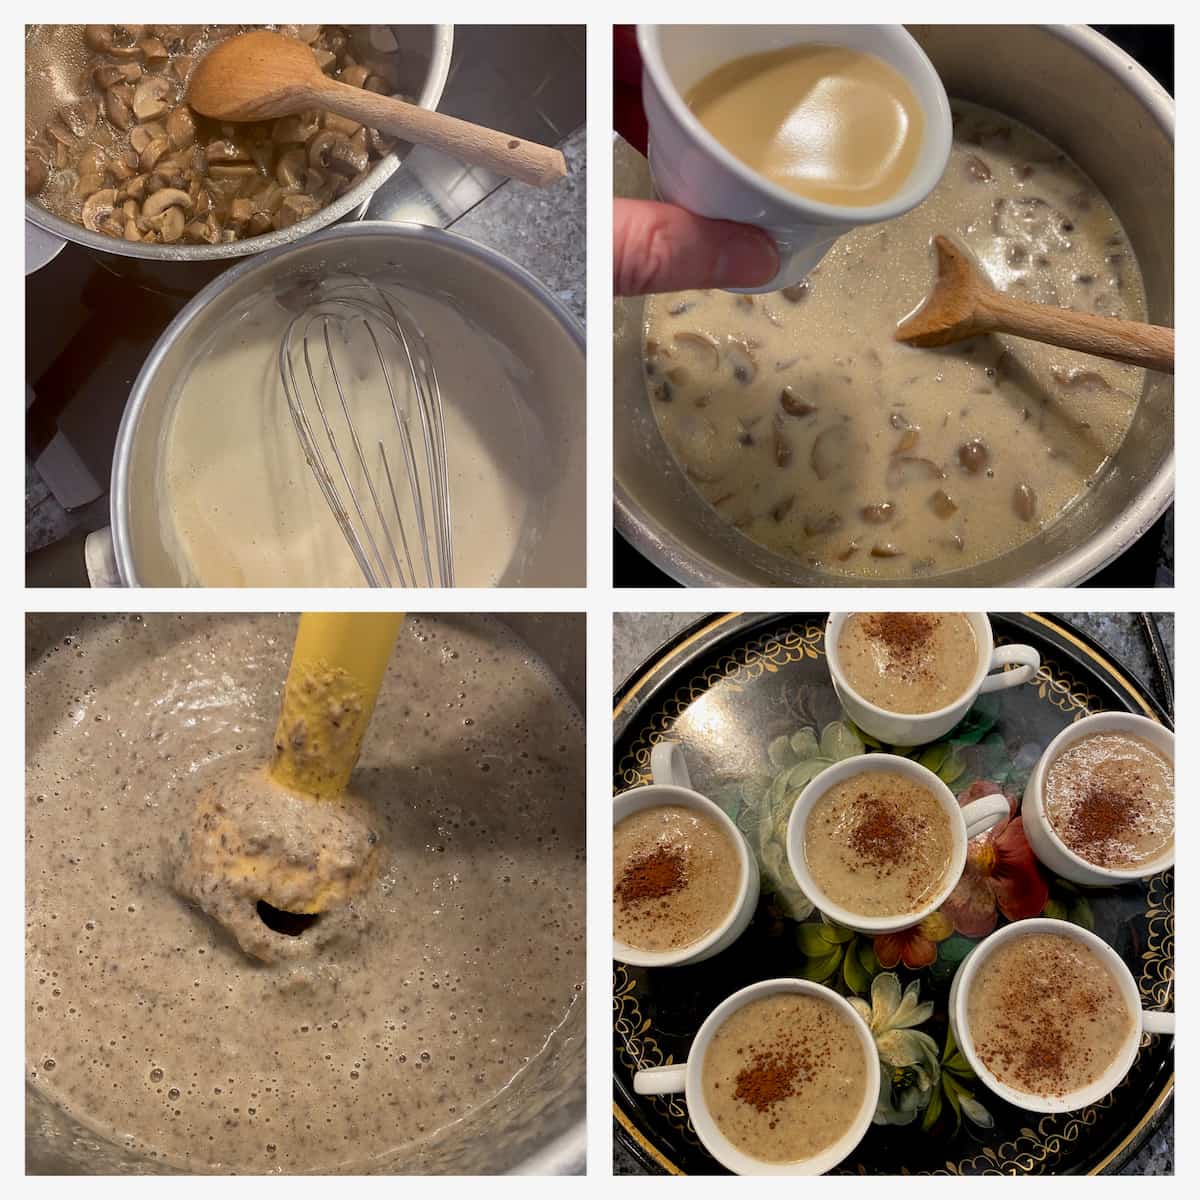 4 images for step-by-step method to make mushroom soup, adding an espresso coffee then blitzing with a hand blender